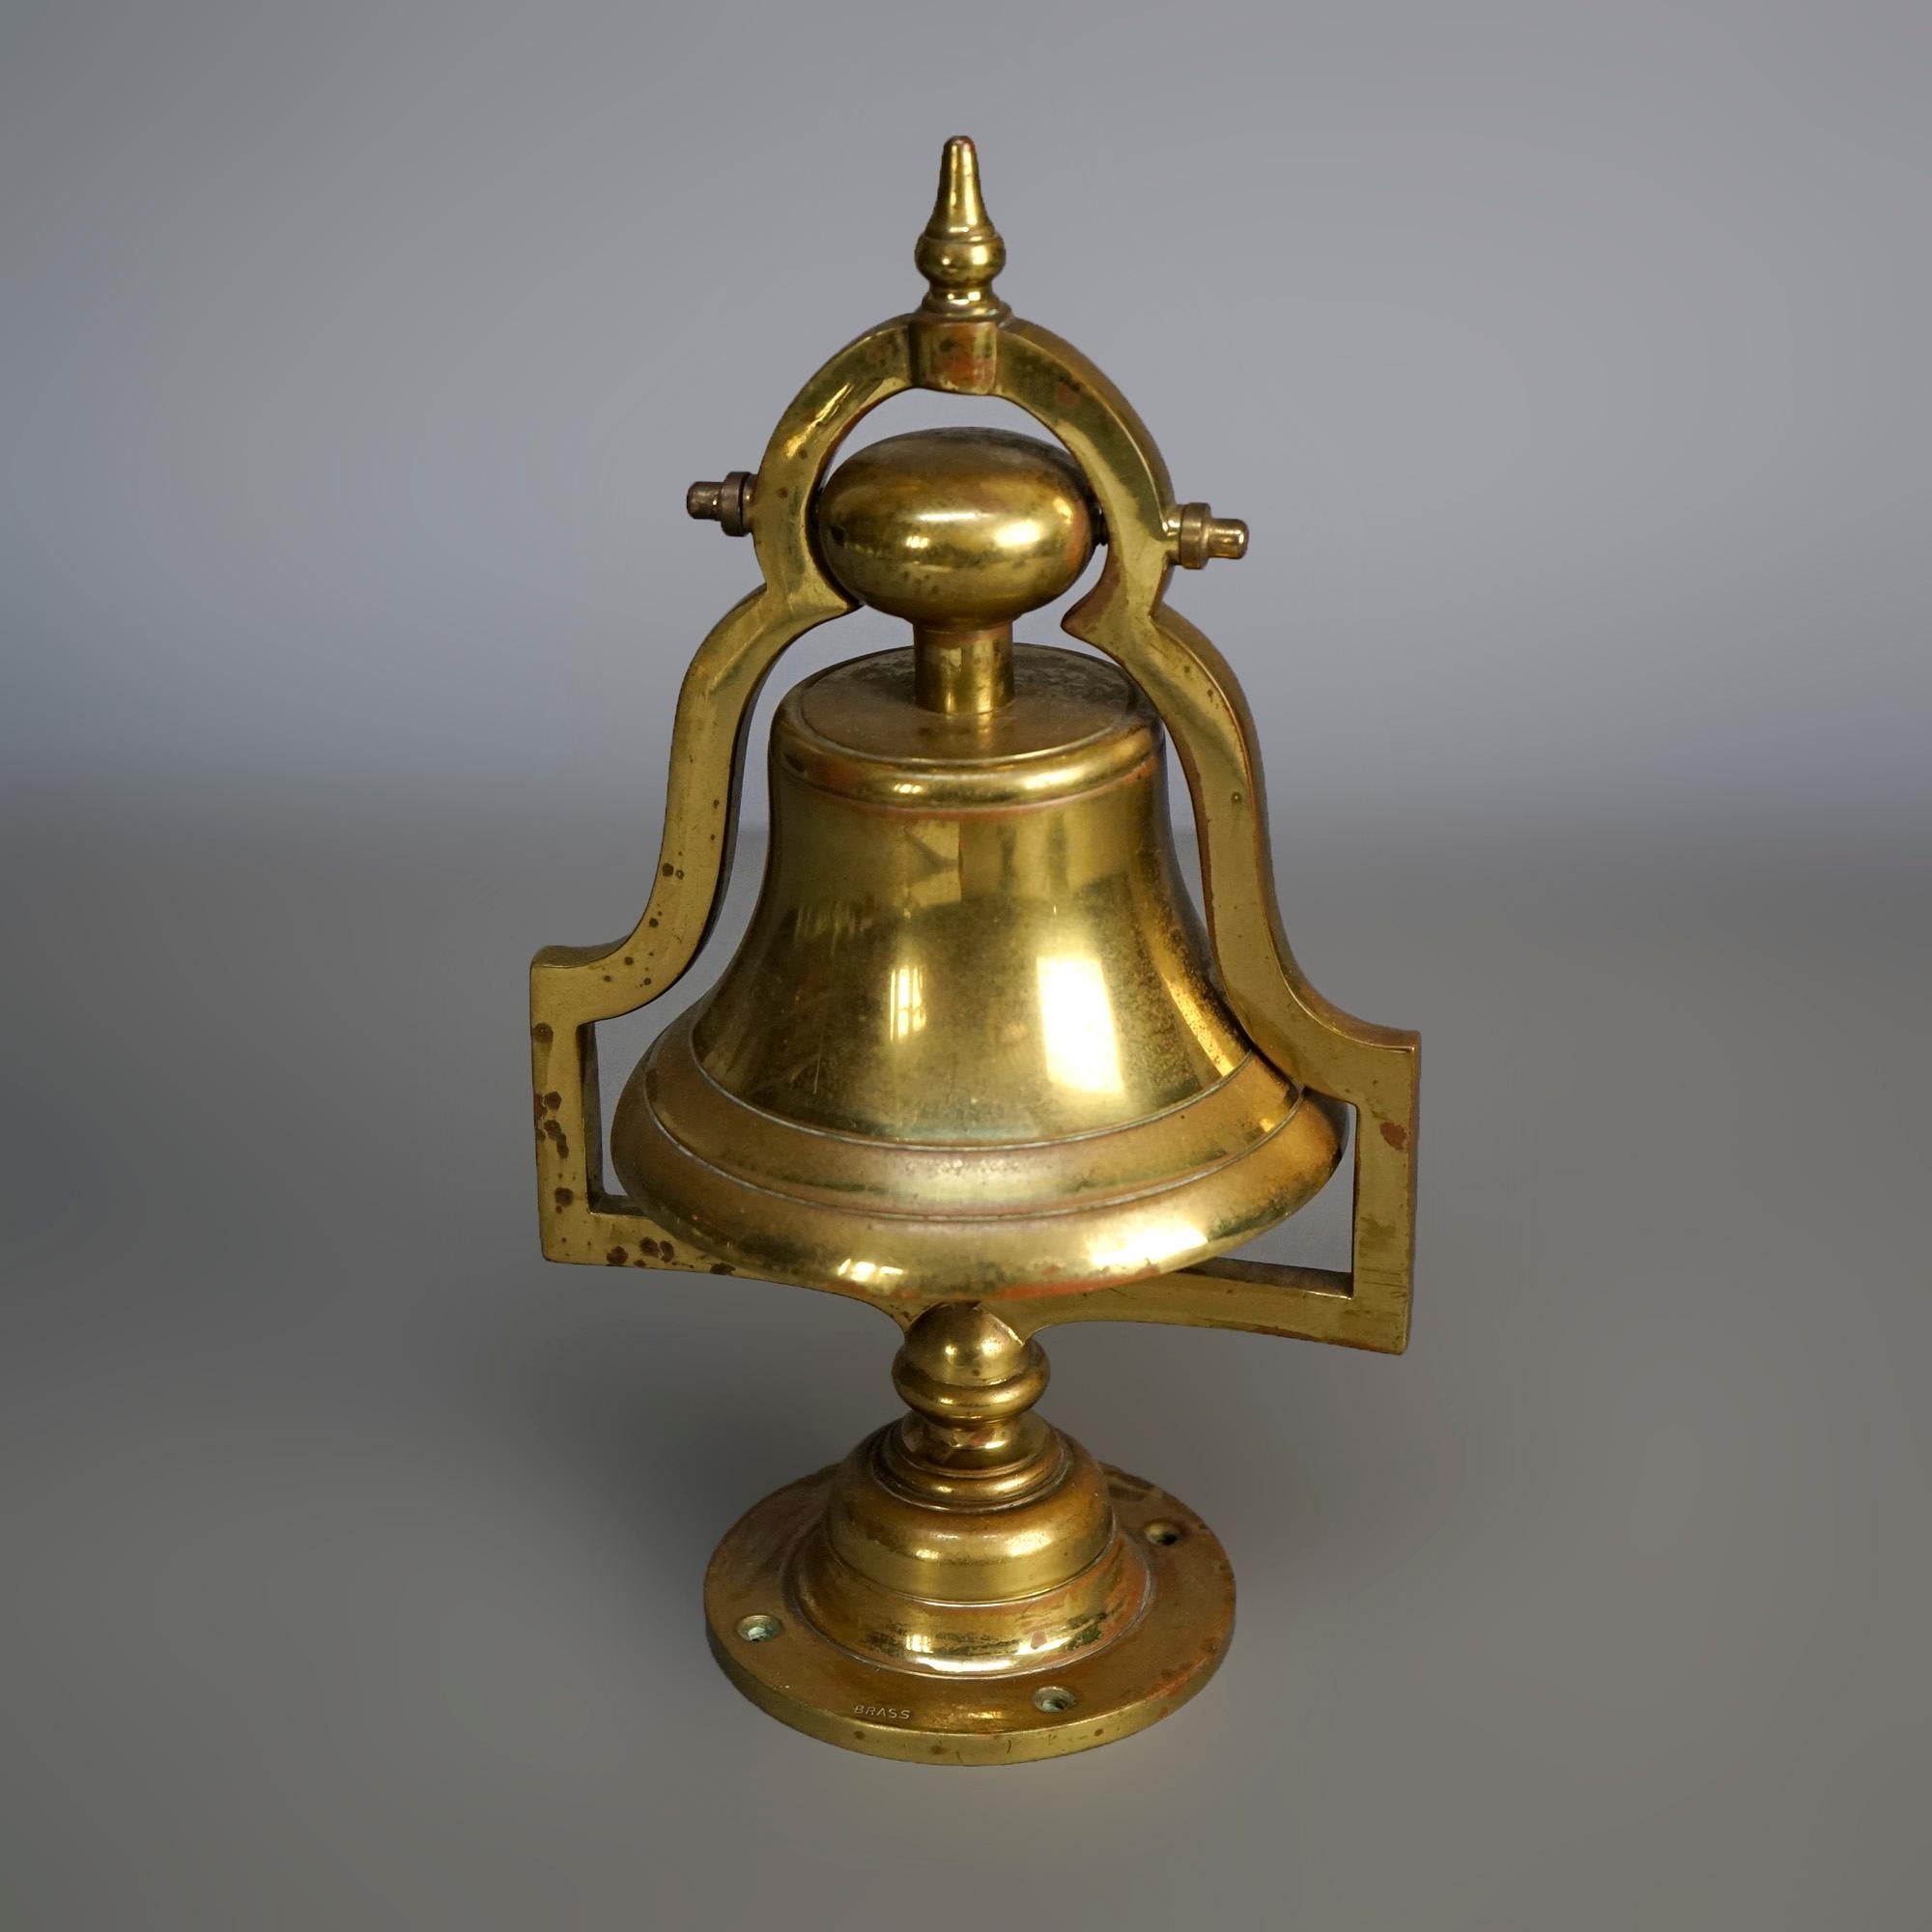 A desk top railroad bell offers cast brass construction with shaped frame over flared base, 20th century.

Measures- 12.5''H x 7''W x 5.5''D.